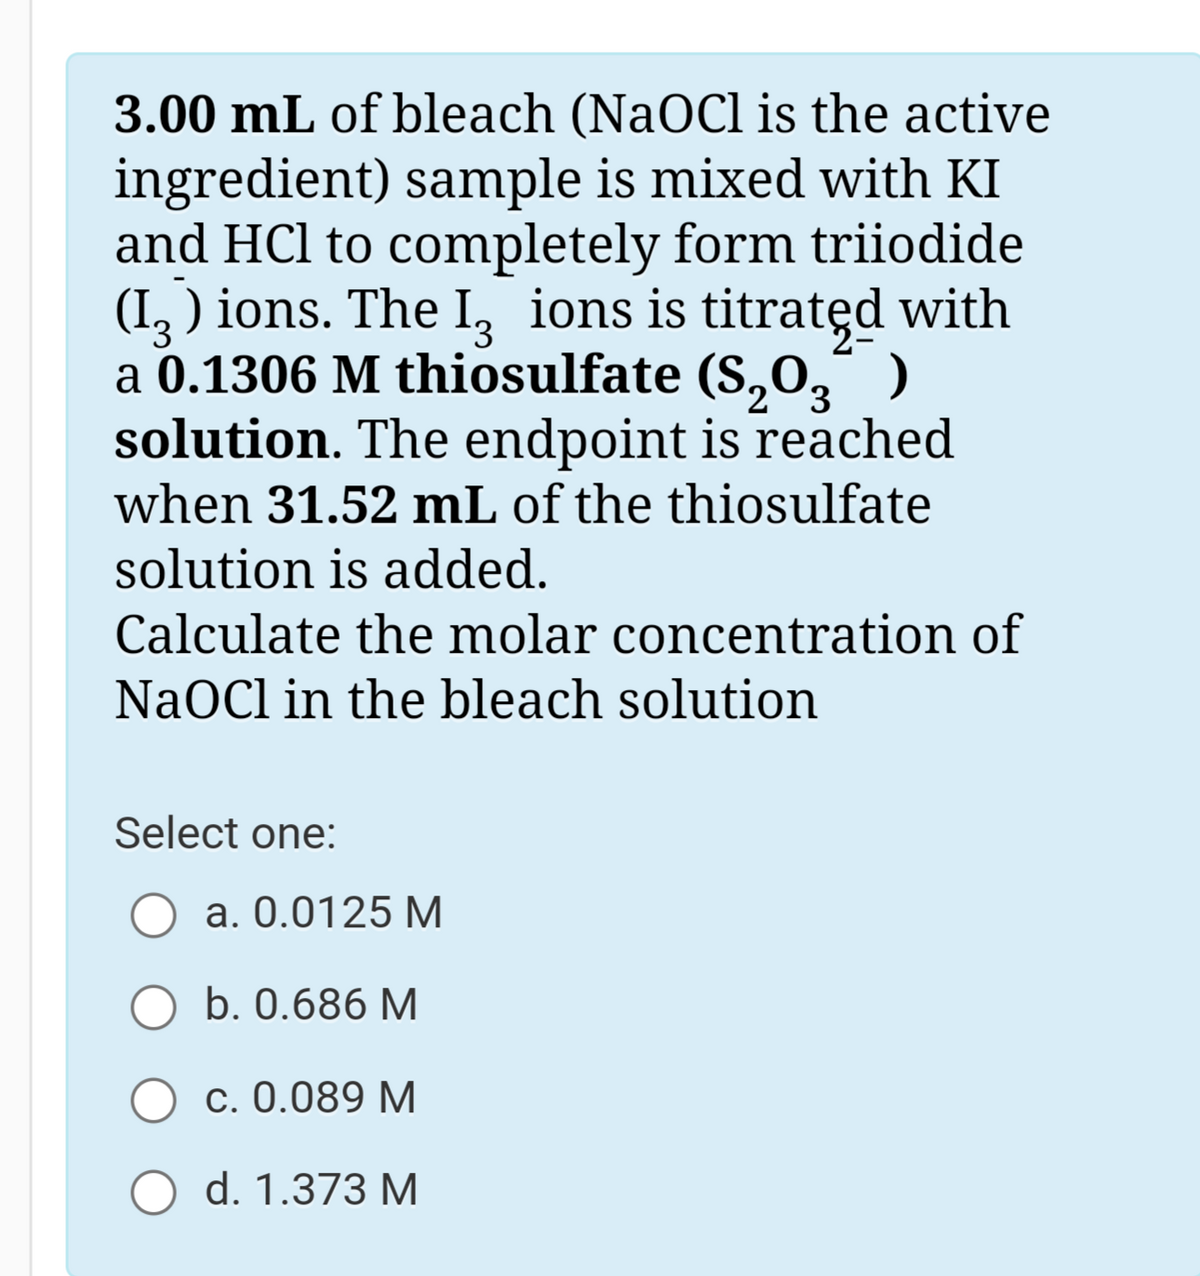 3.00 mL of bleach (NaOCl is the active
ingredient) sample is mixed with KI
and HCl to completely form triiodide
(I, ) ions. The I, ions is titratęd with
a 0.1306 M thiosulfate (S,0,° )
solution. The endpoint is reached
when 31.52 mL of the thiosulfate
solution is added.
Calculate the molar concentration of
NaOCl in the bleach solution
Select one:
a. 0.0125 M
b. 0.686 M
c. 0.089 M
d. 1.373 M
